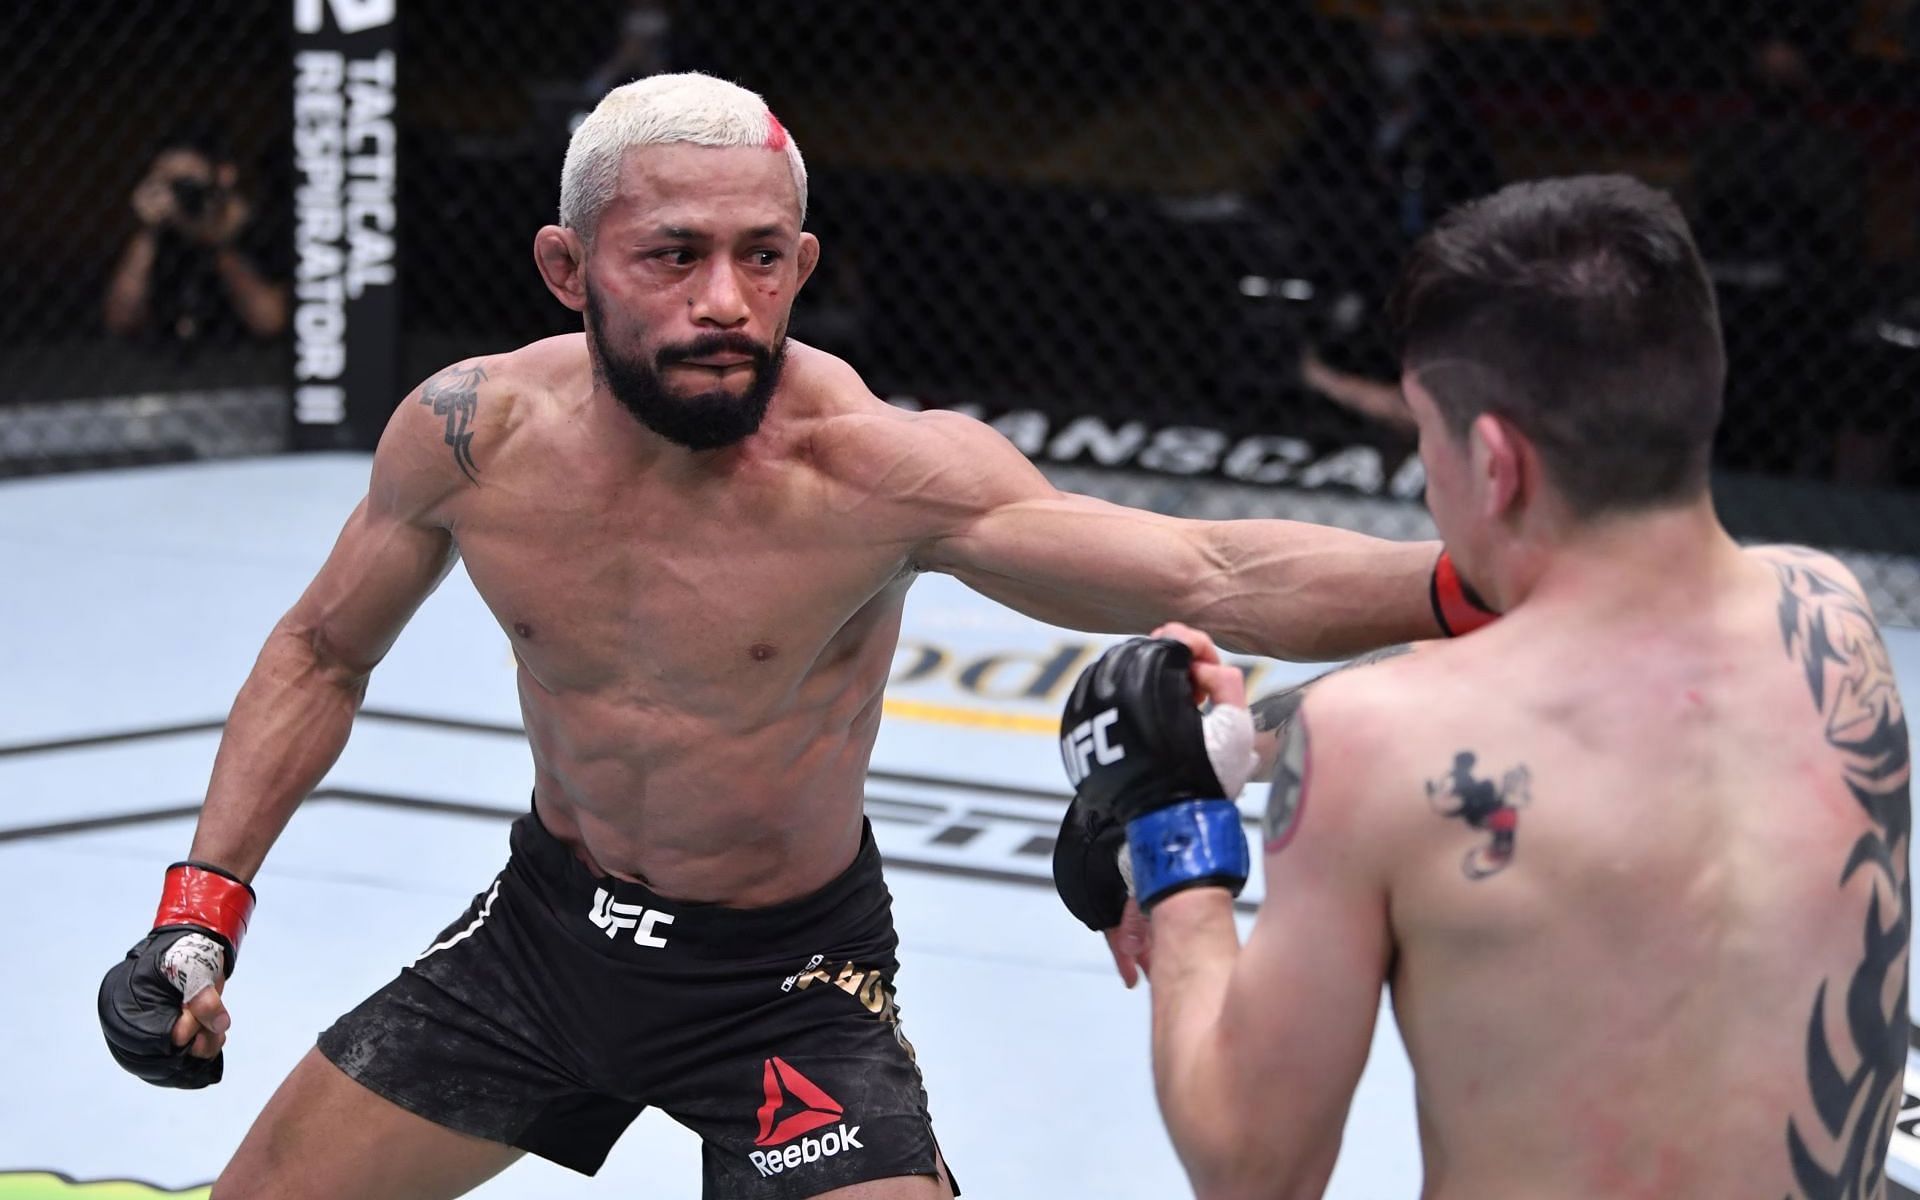 Deiveson Figueiredo and Brandon Moreno were the last male flyweights to headline a UFC event [Image Credit: Getty]